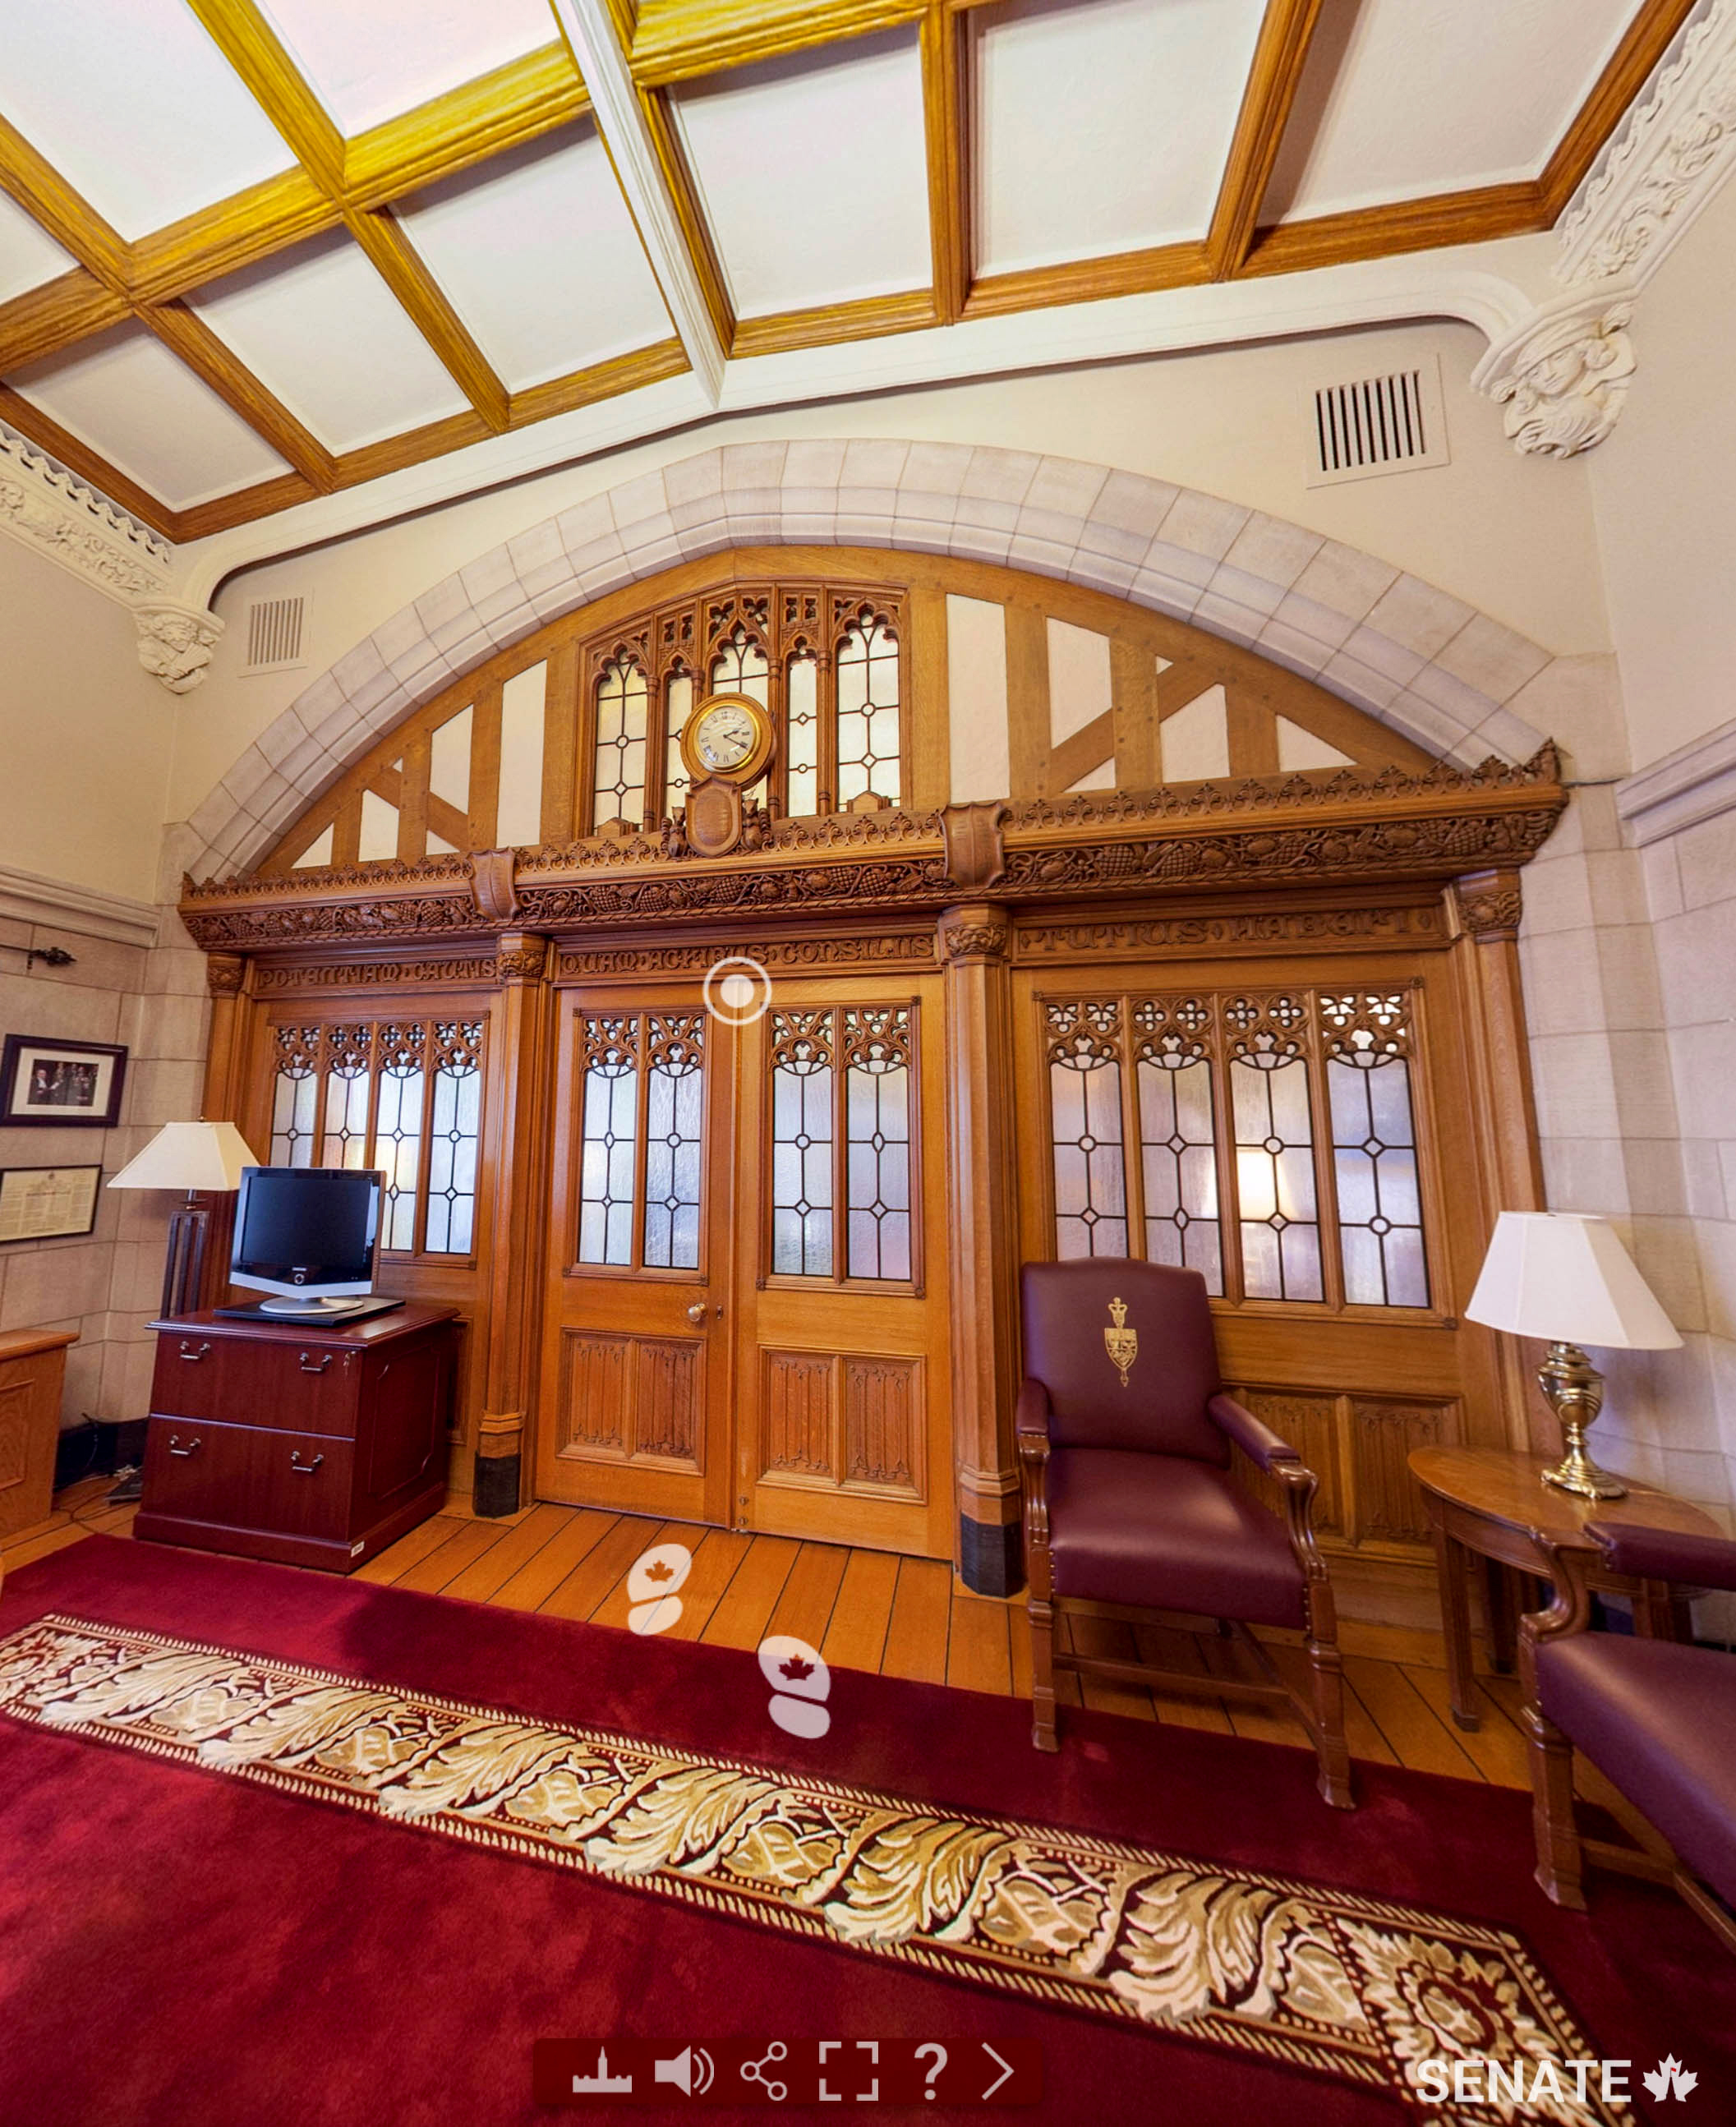 The expanded Senate Virtual Tour includes the chambers of the Speaker of the Senate.